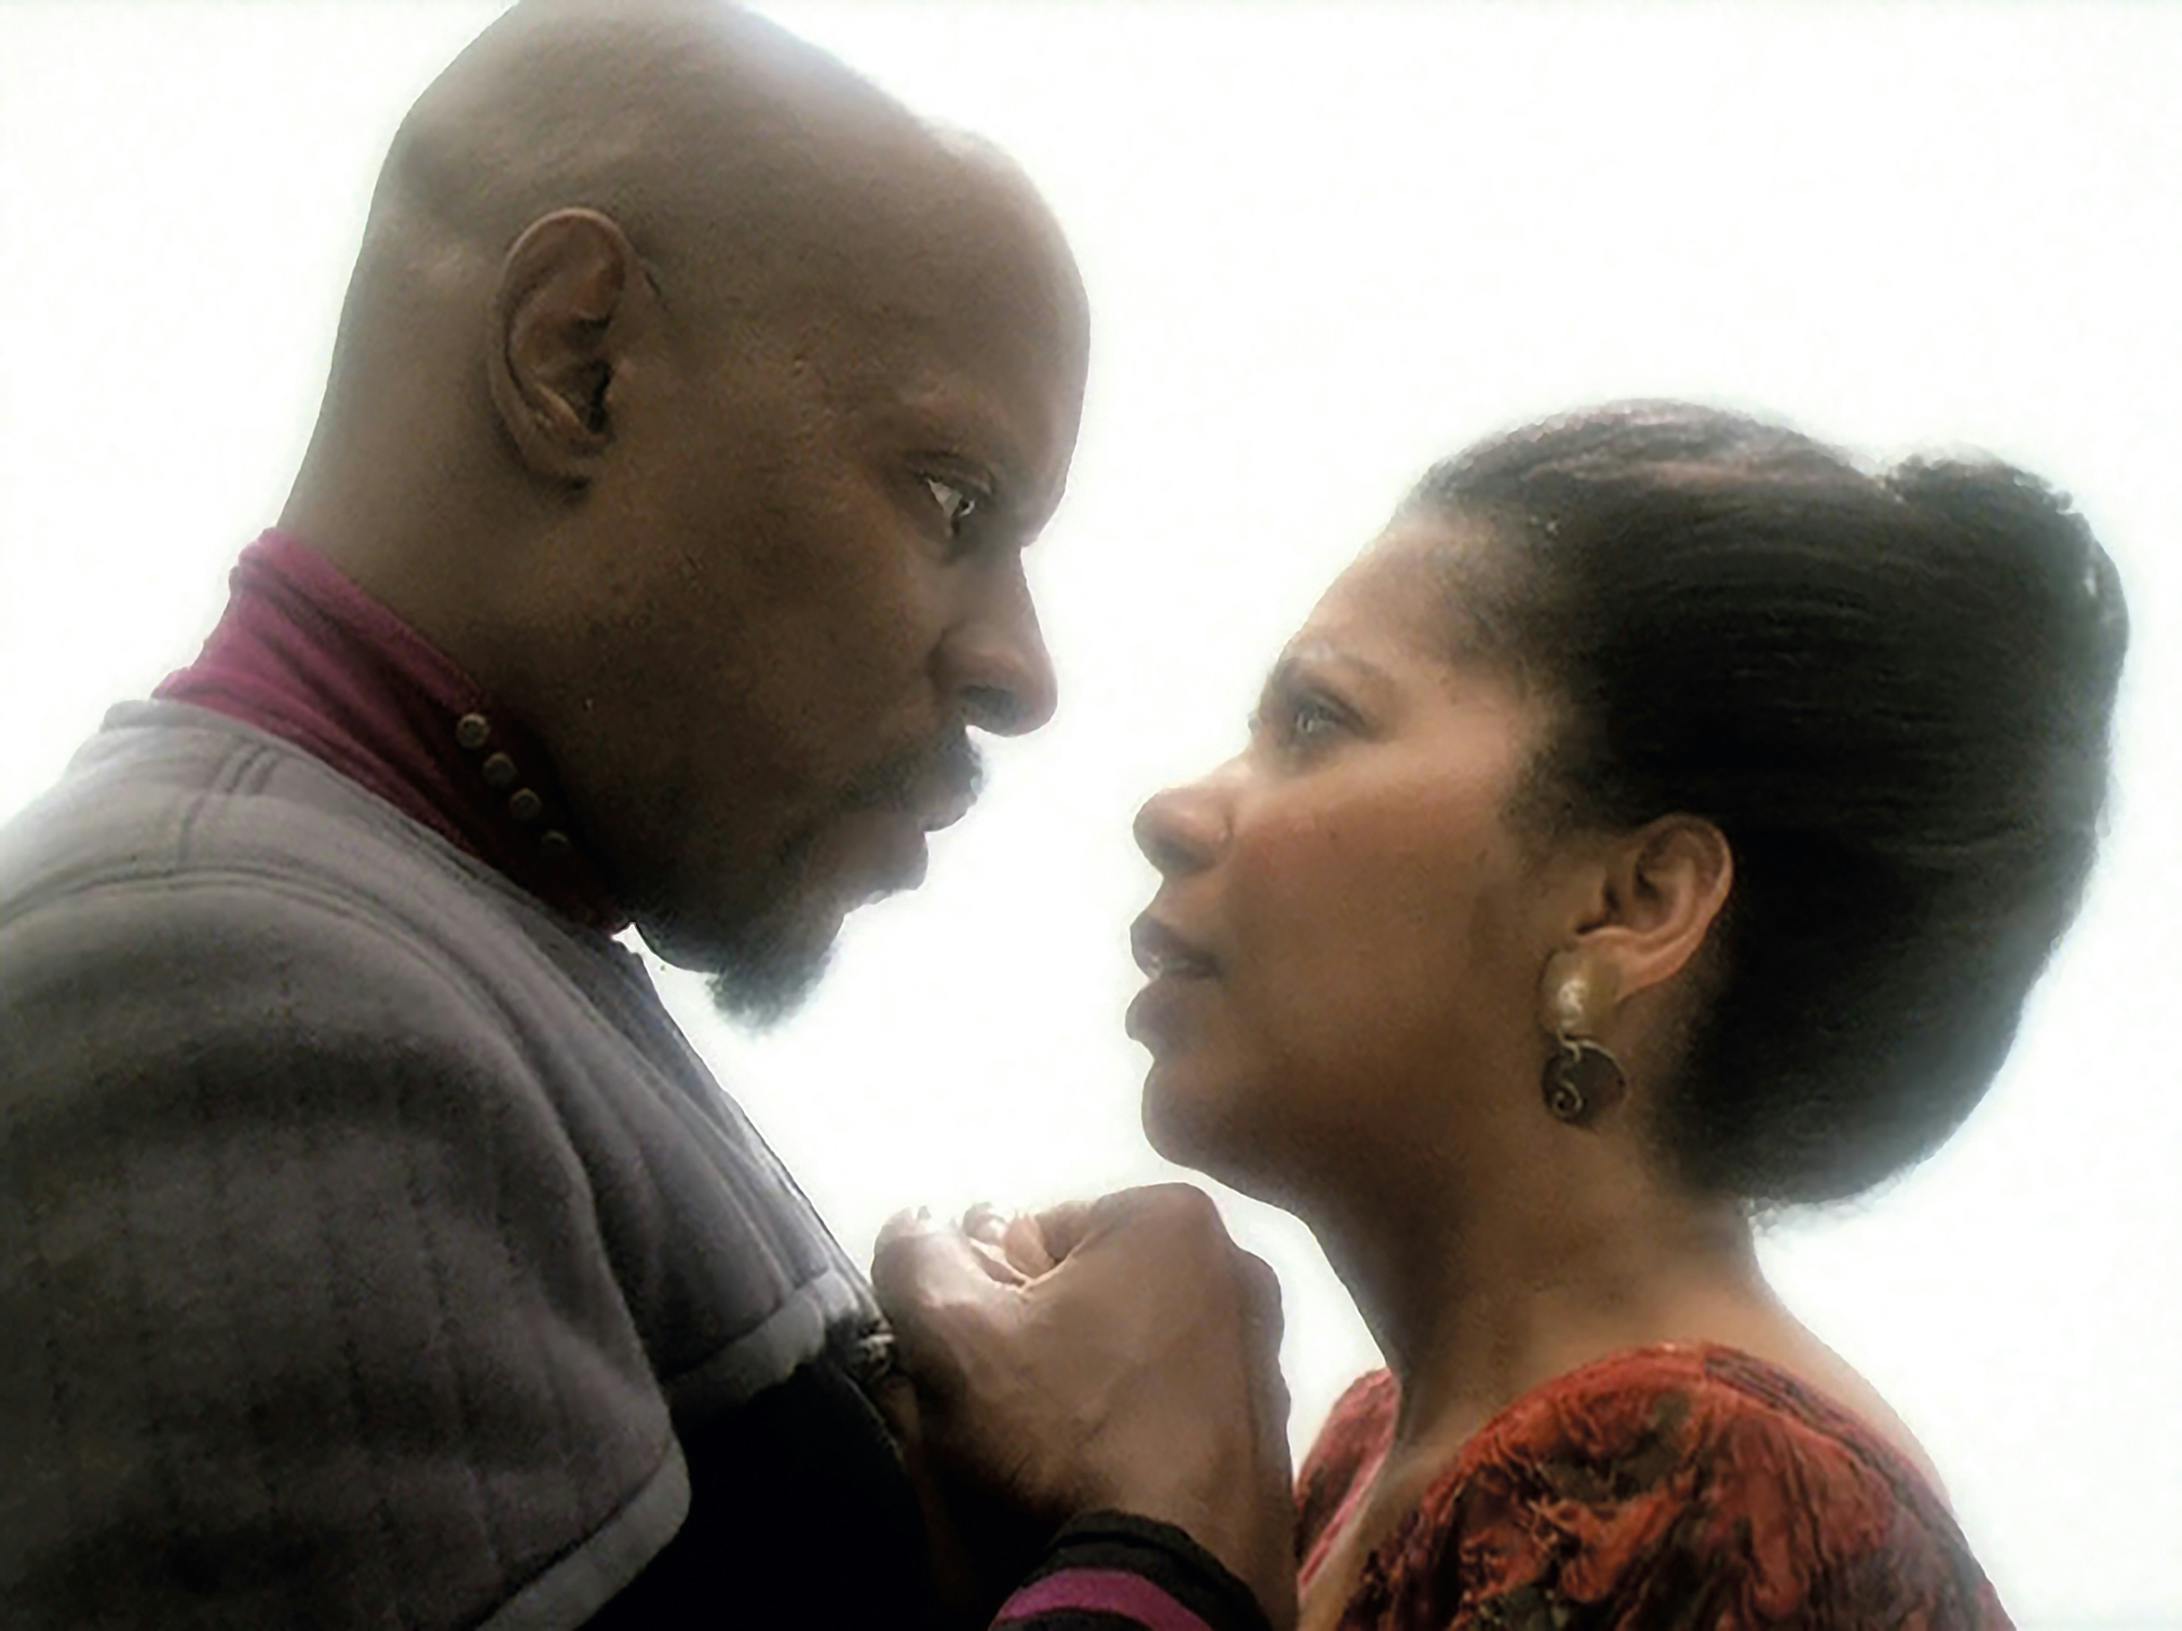 Benjamin Sisko and Kasidy Yates clasping hands as they gaze into each other's eyes in 'What You Leave Behind'